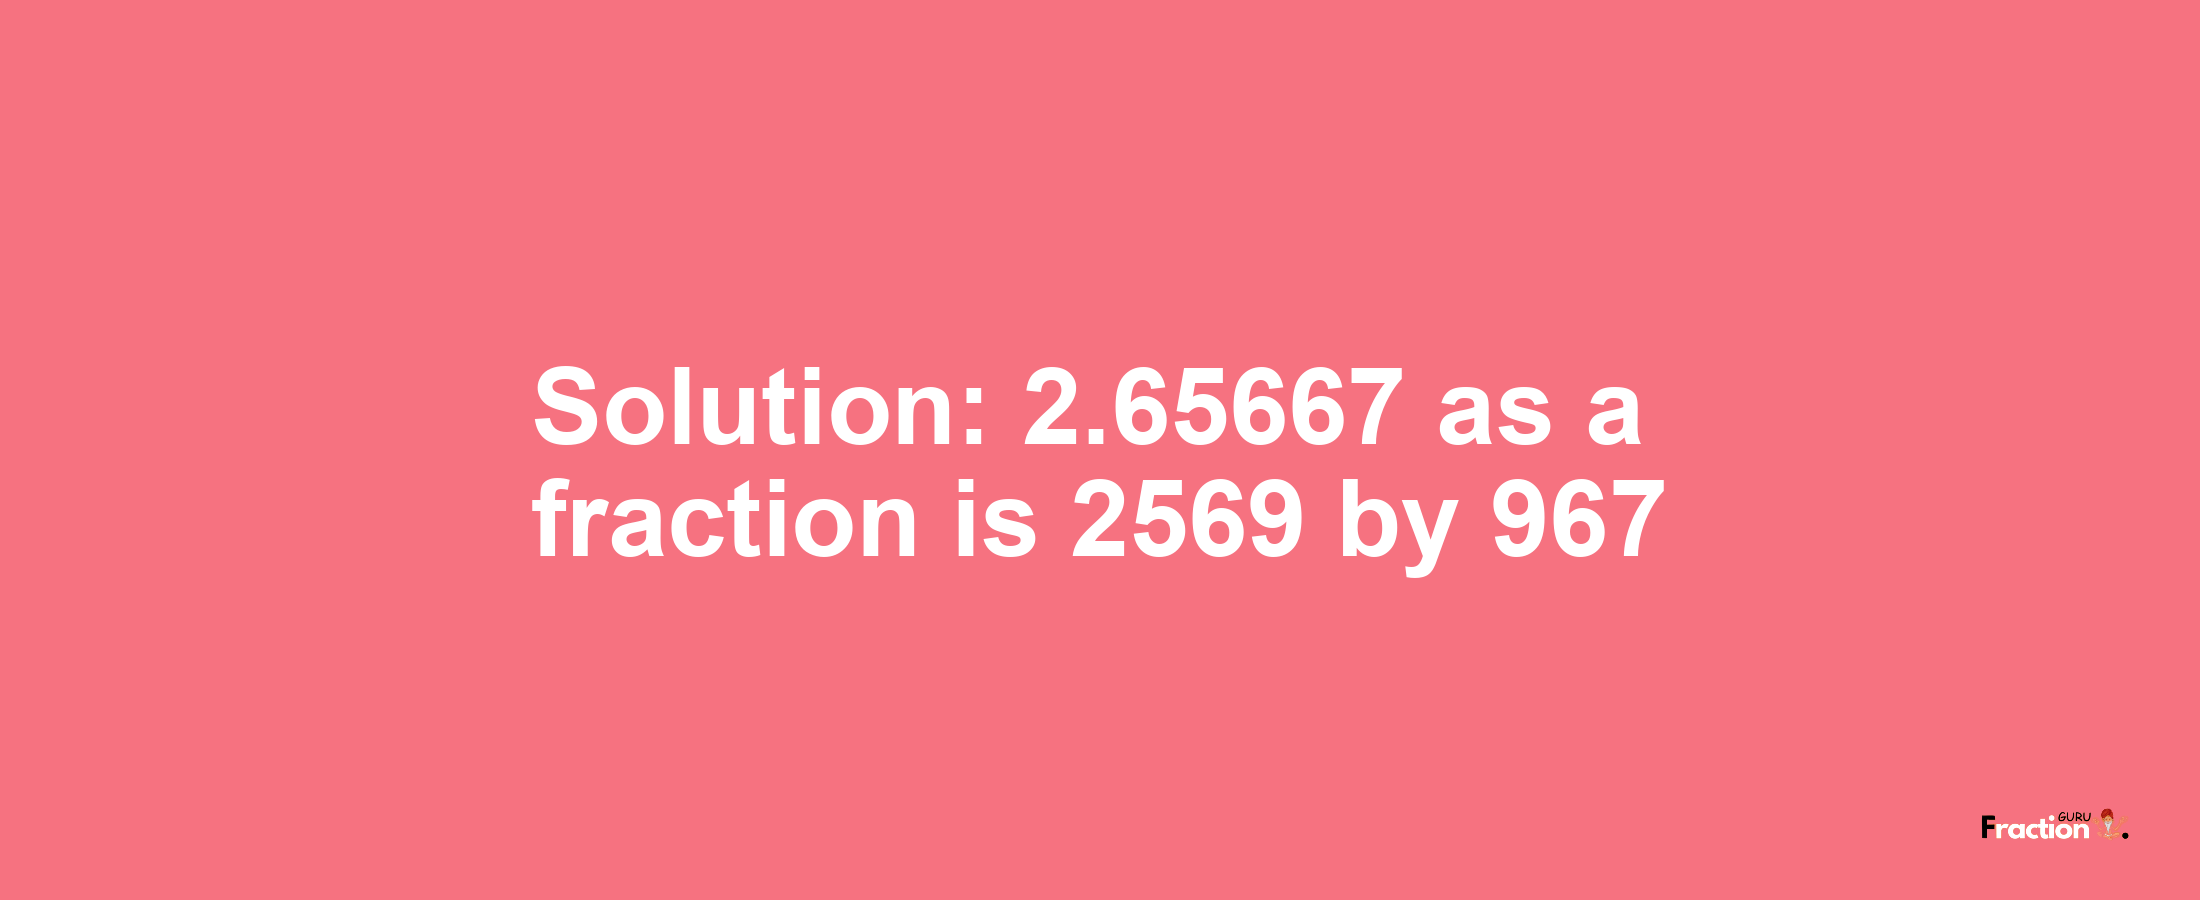 Solution:2.65667 as a fraction is 2569/967